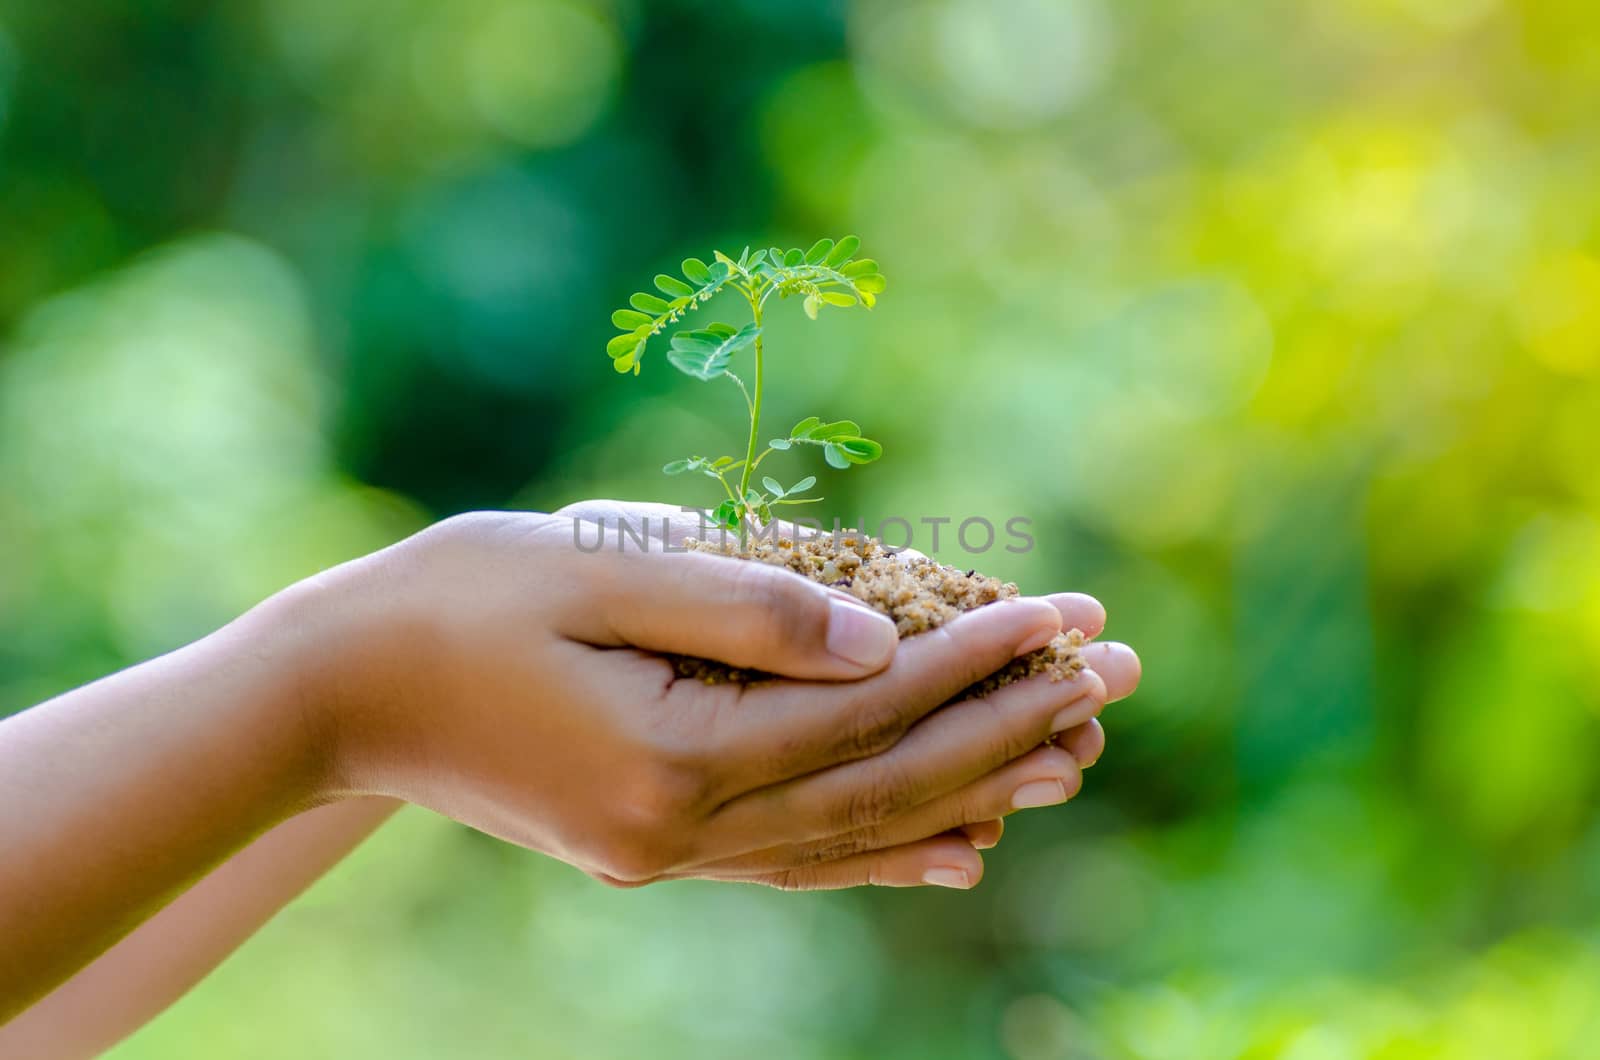 In the hands of trees growing seedlings. Bokeh green Background Female hand holding tree on nature field grass Forest conservation concept by sarayut_thaneerat